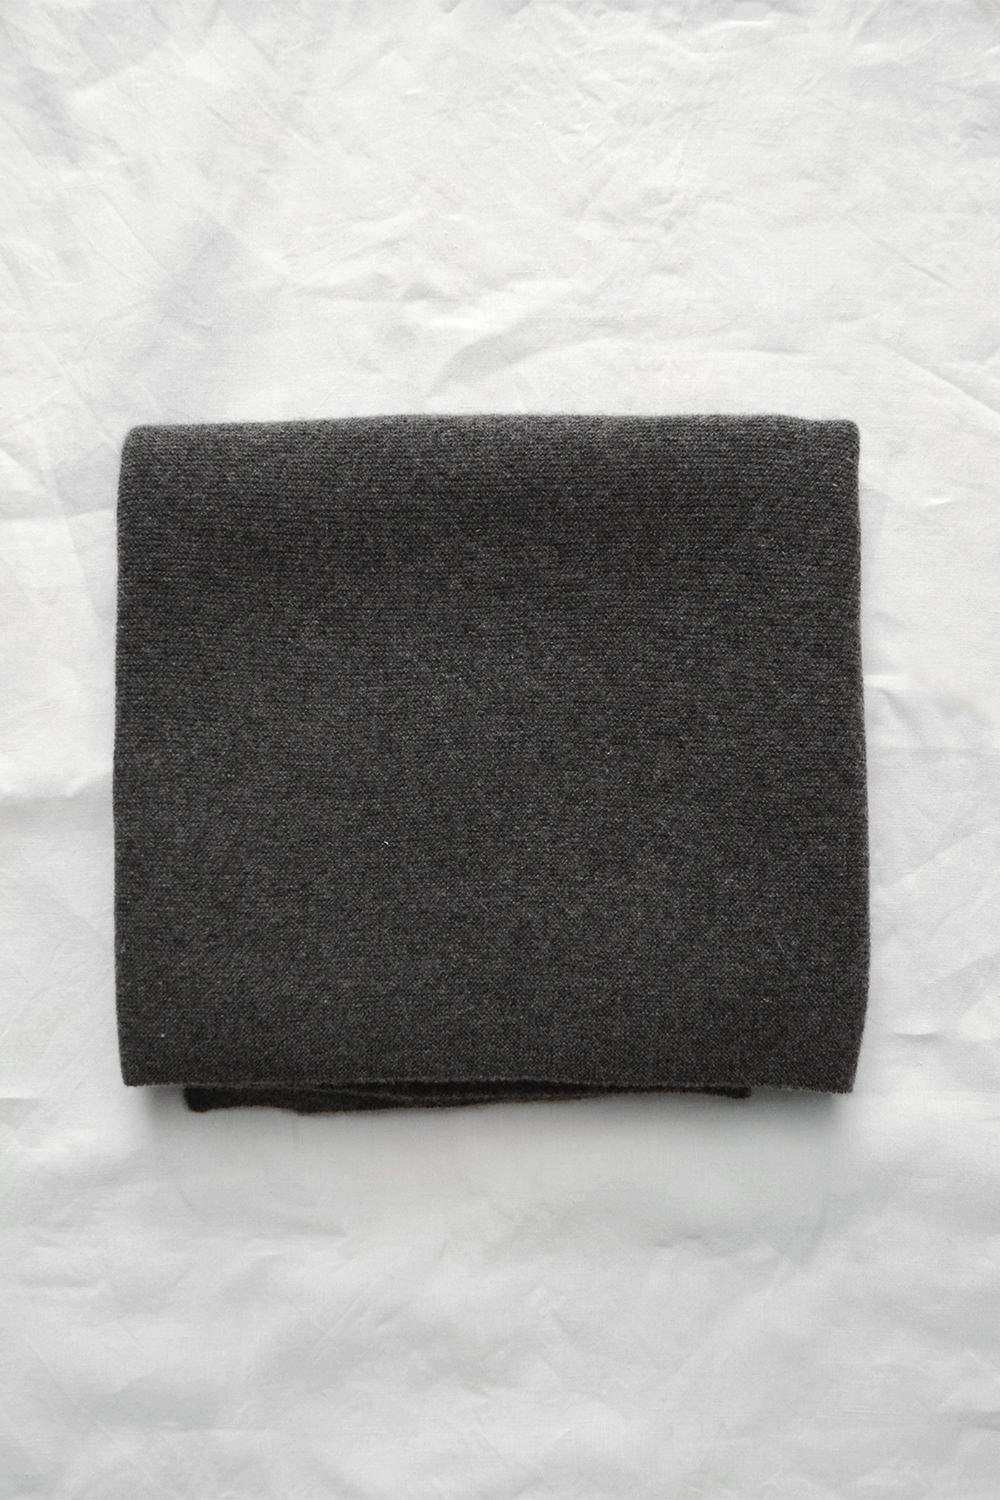 Cashmere Blanket in Charcoal Top Pictures